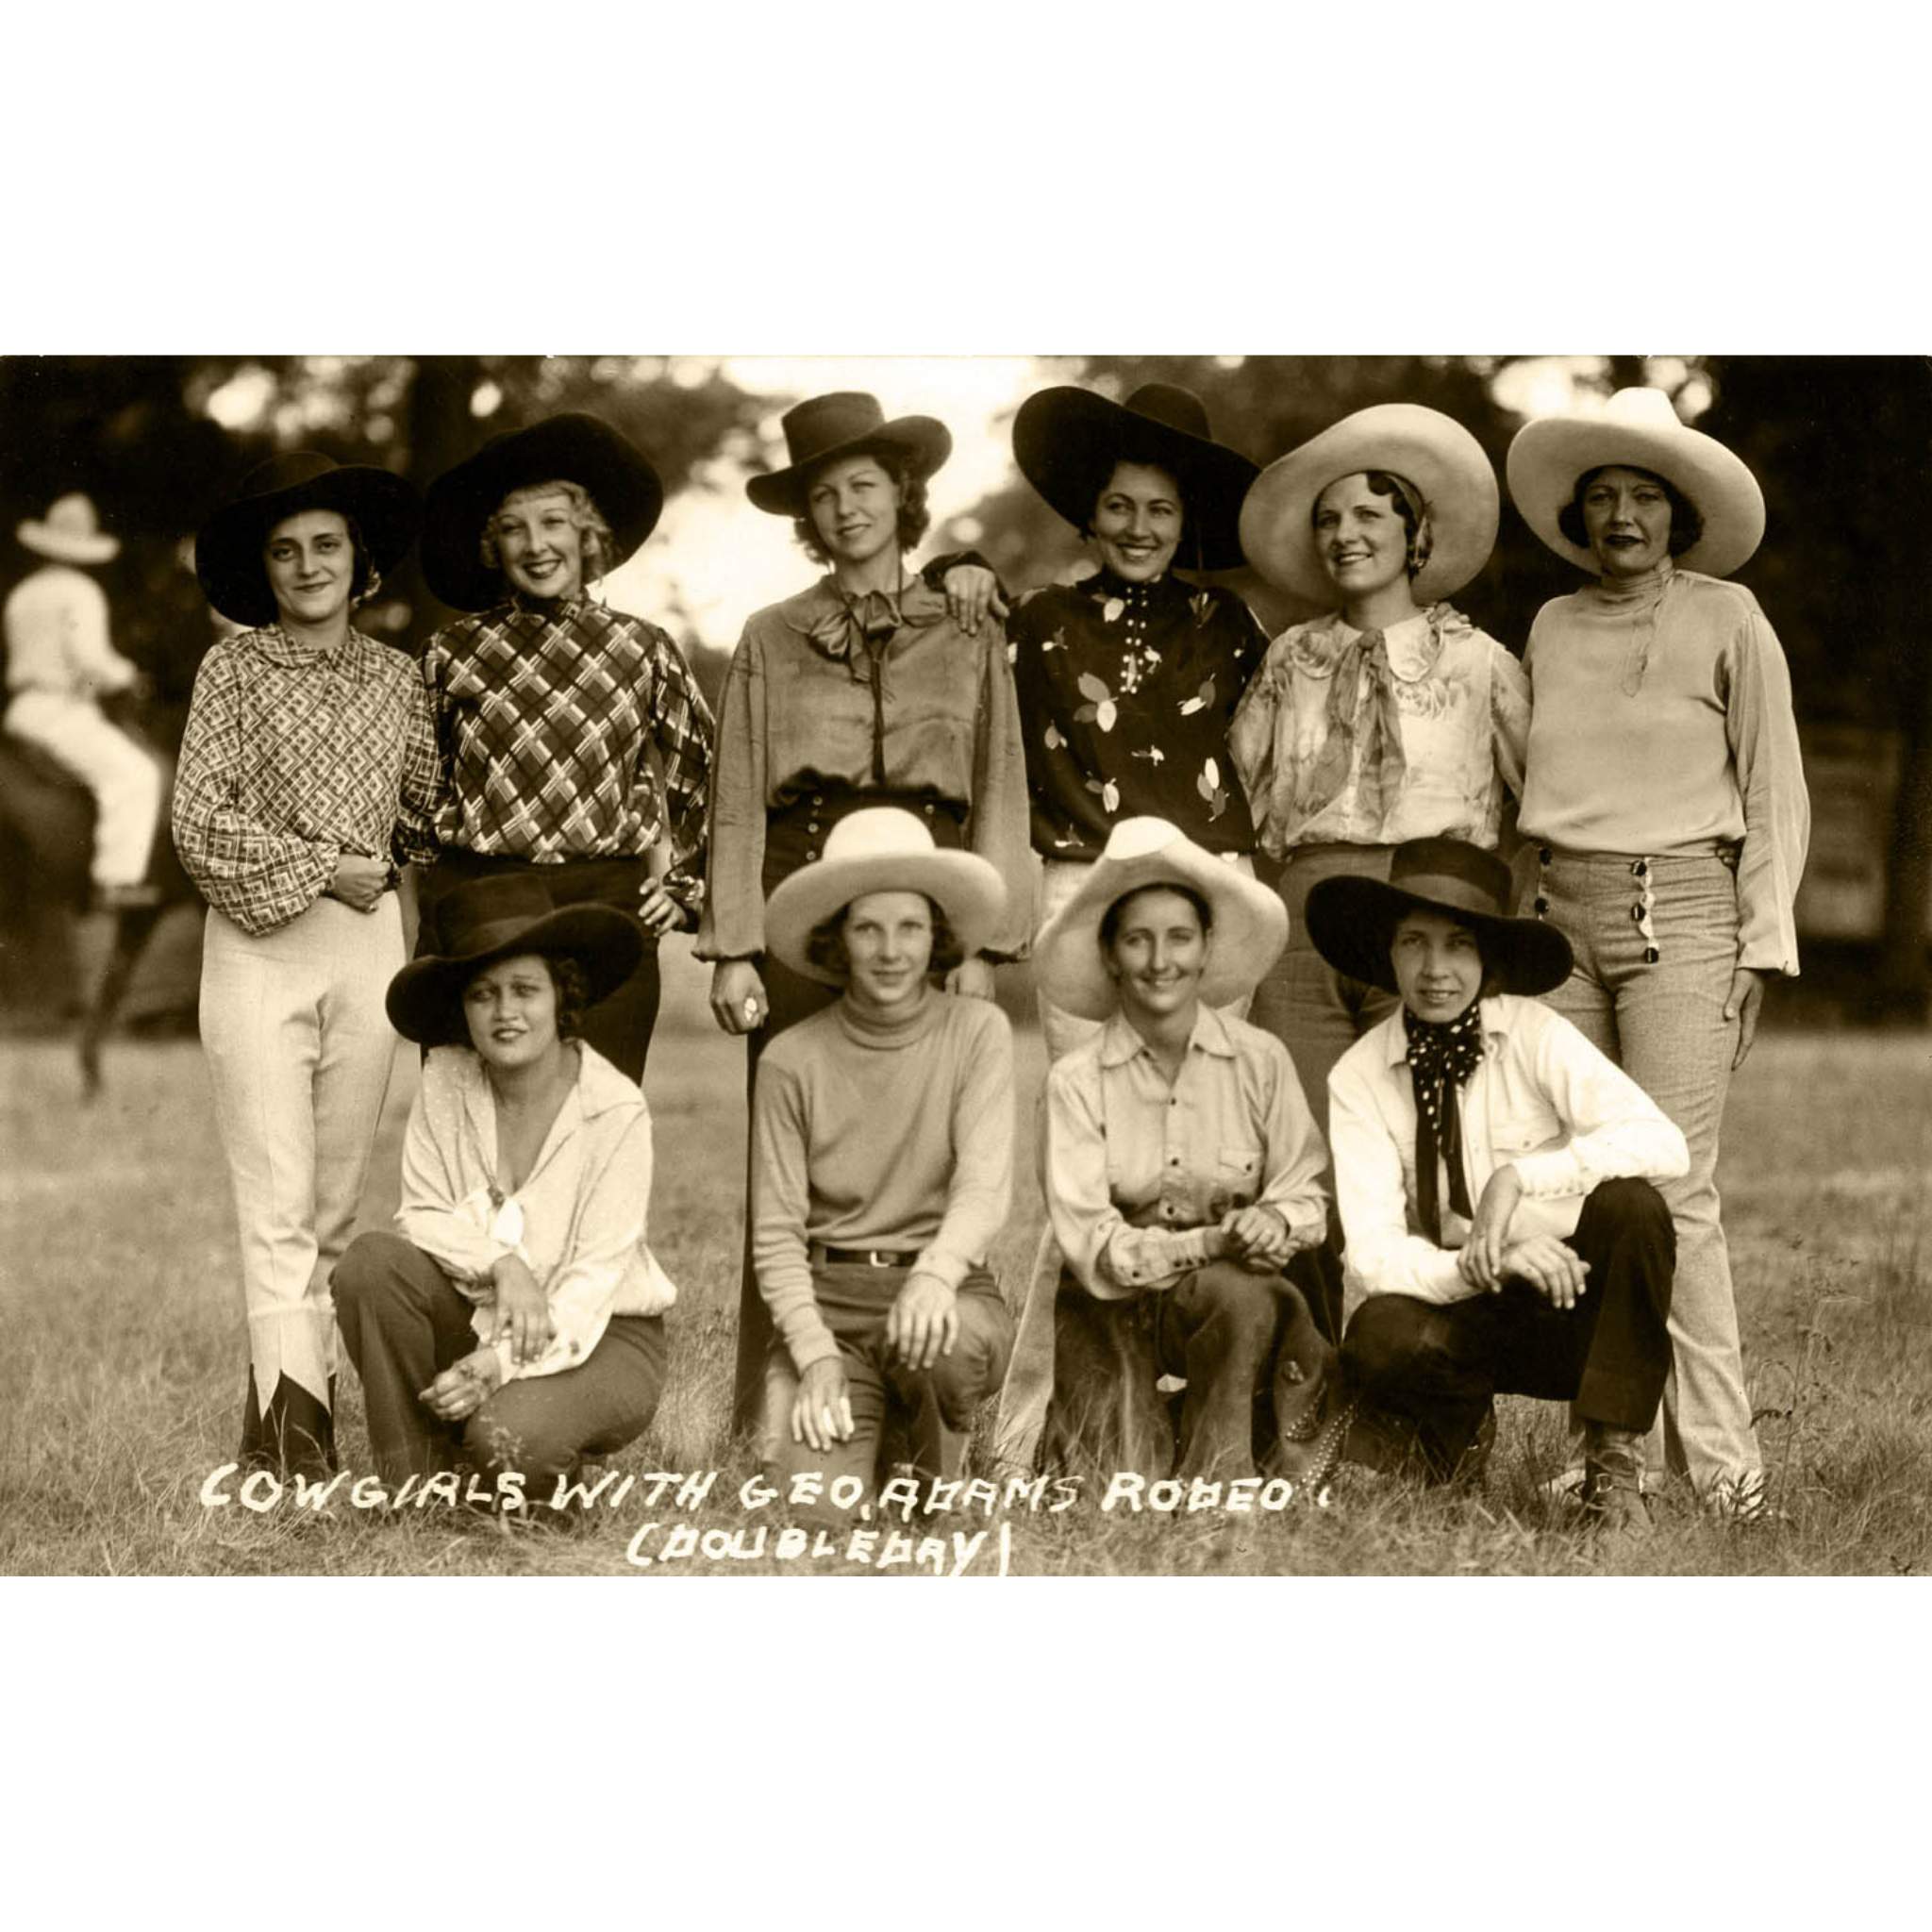 Cowgirls with George Adams Rodeo (Memphis) - Doubleday - ca. 1925 Photograph